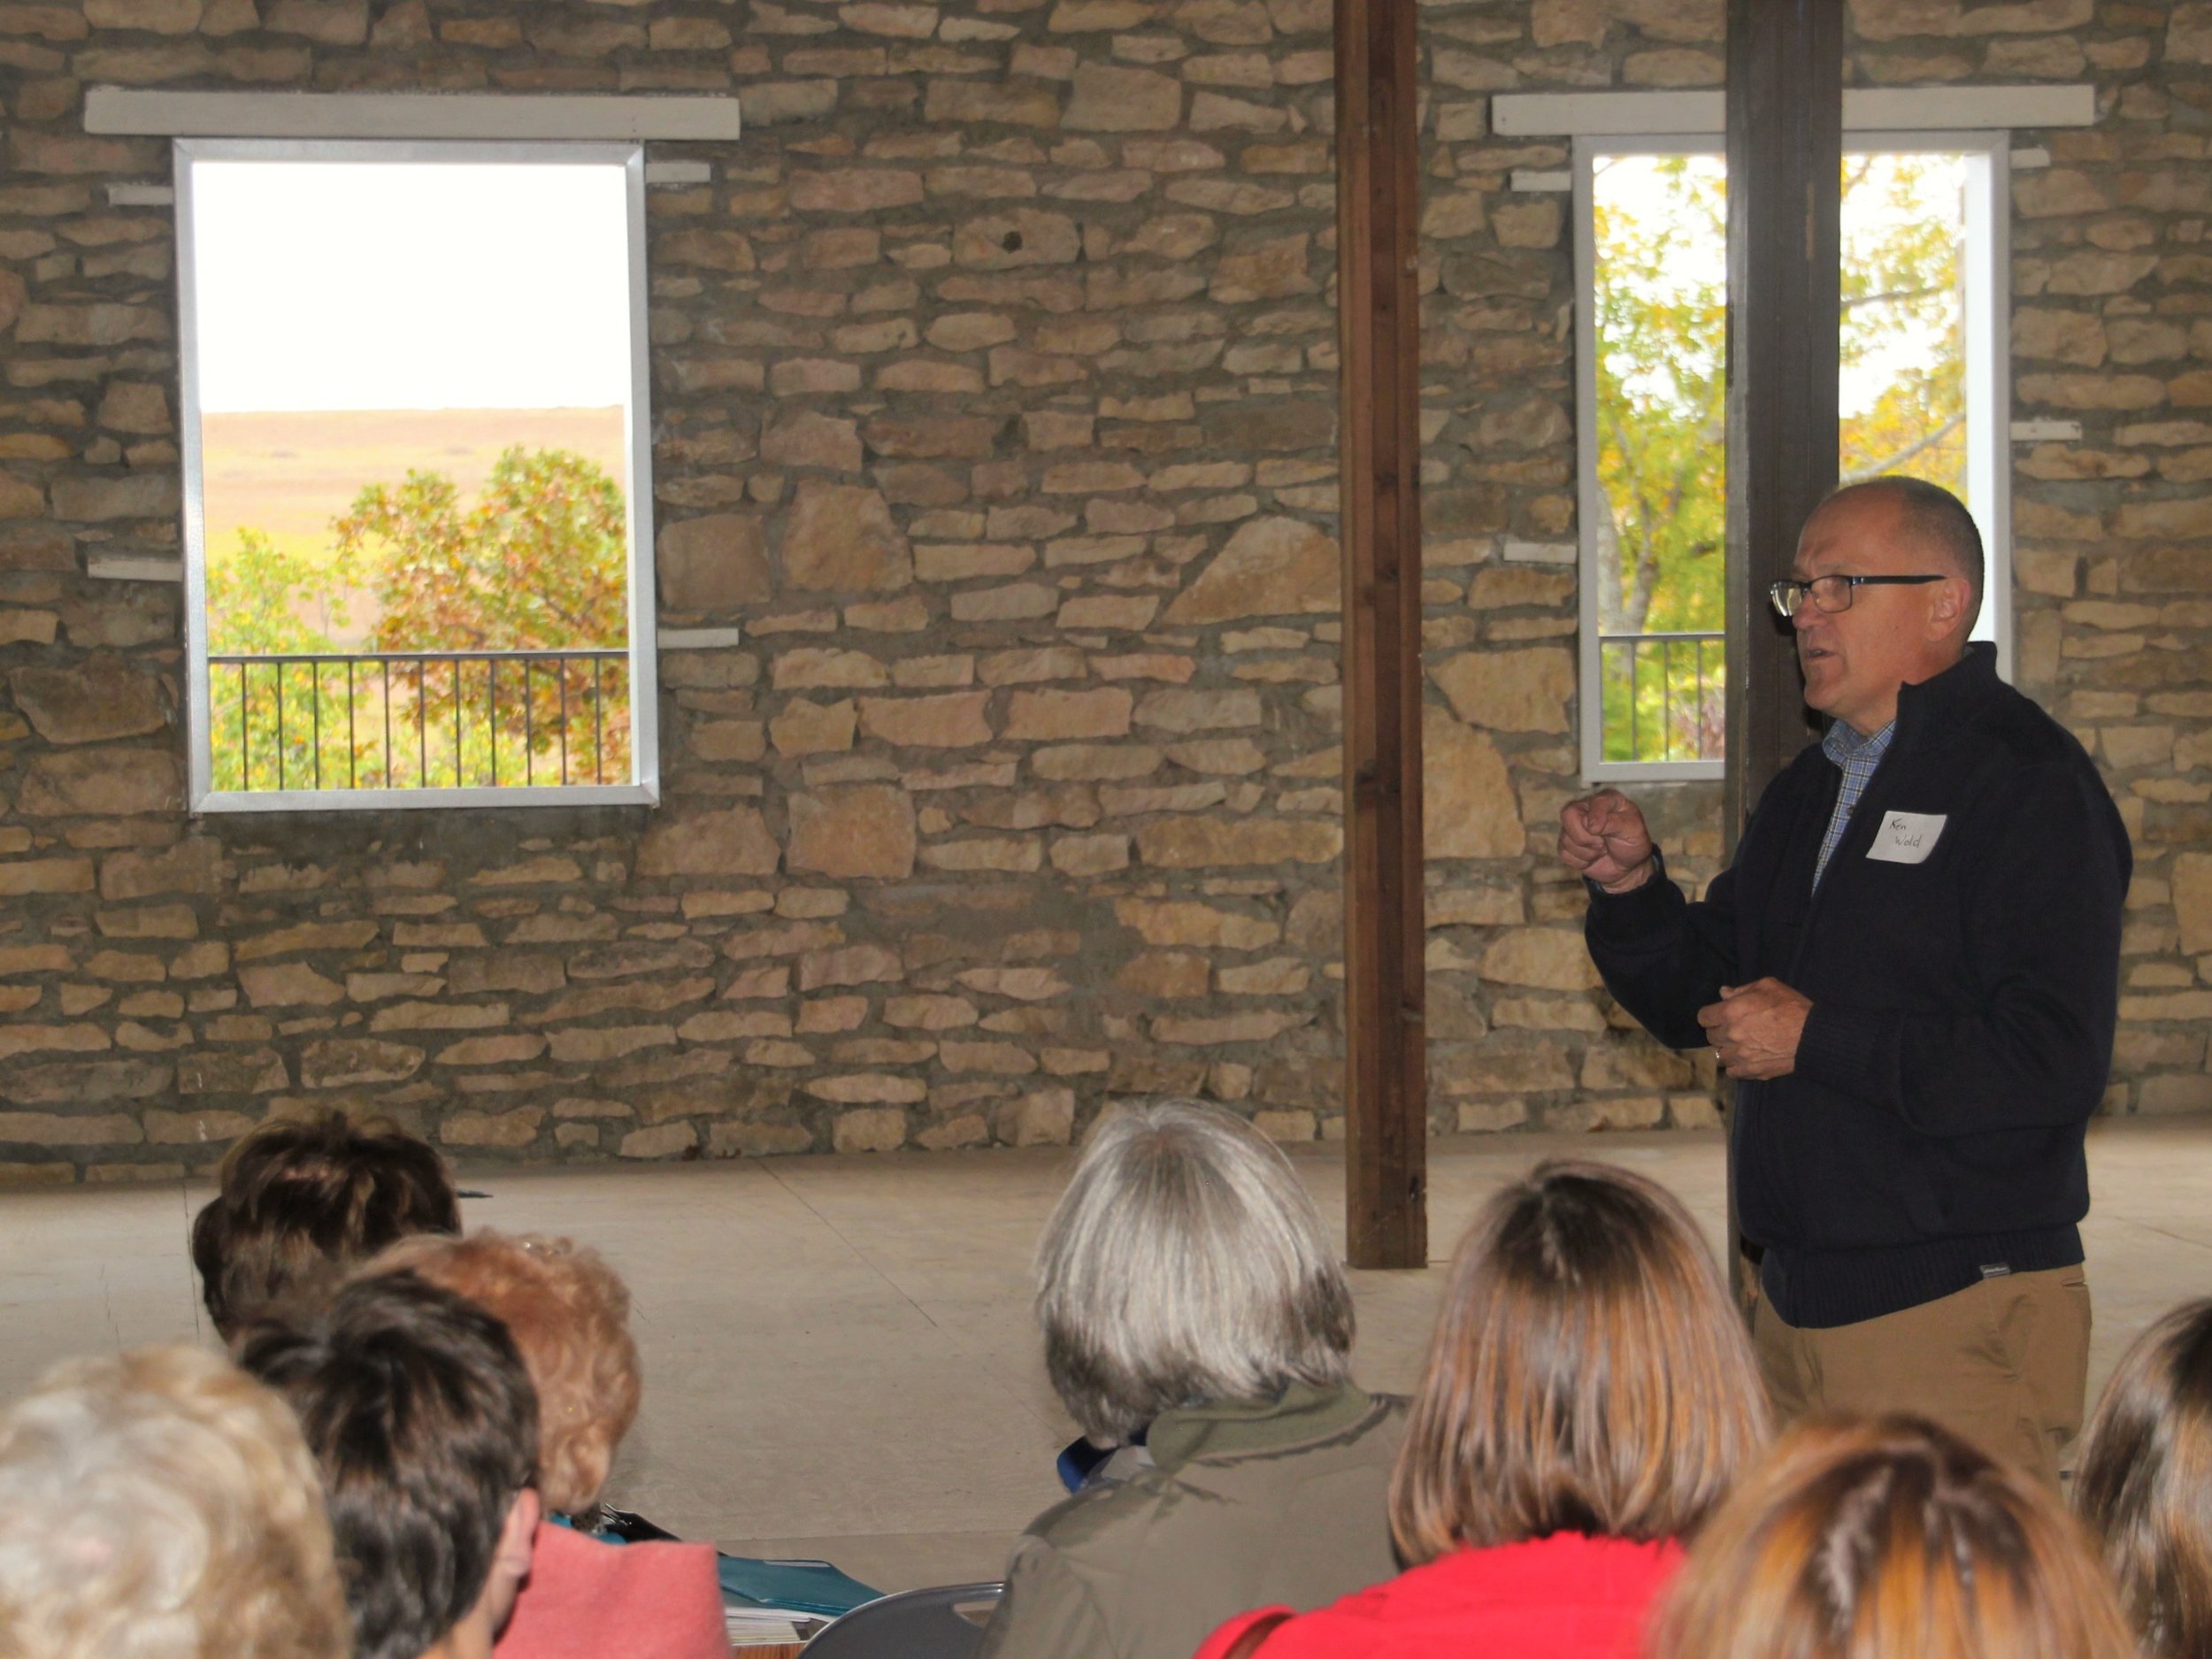 Ken speaks with visitors during Hutch Hall's renovation. The old wooden backstage was removed and the original views to the hills beyond was restored.